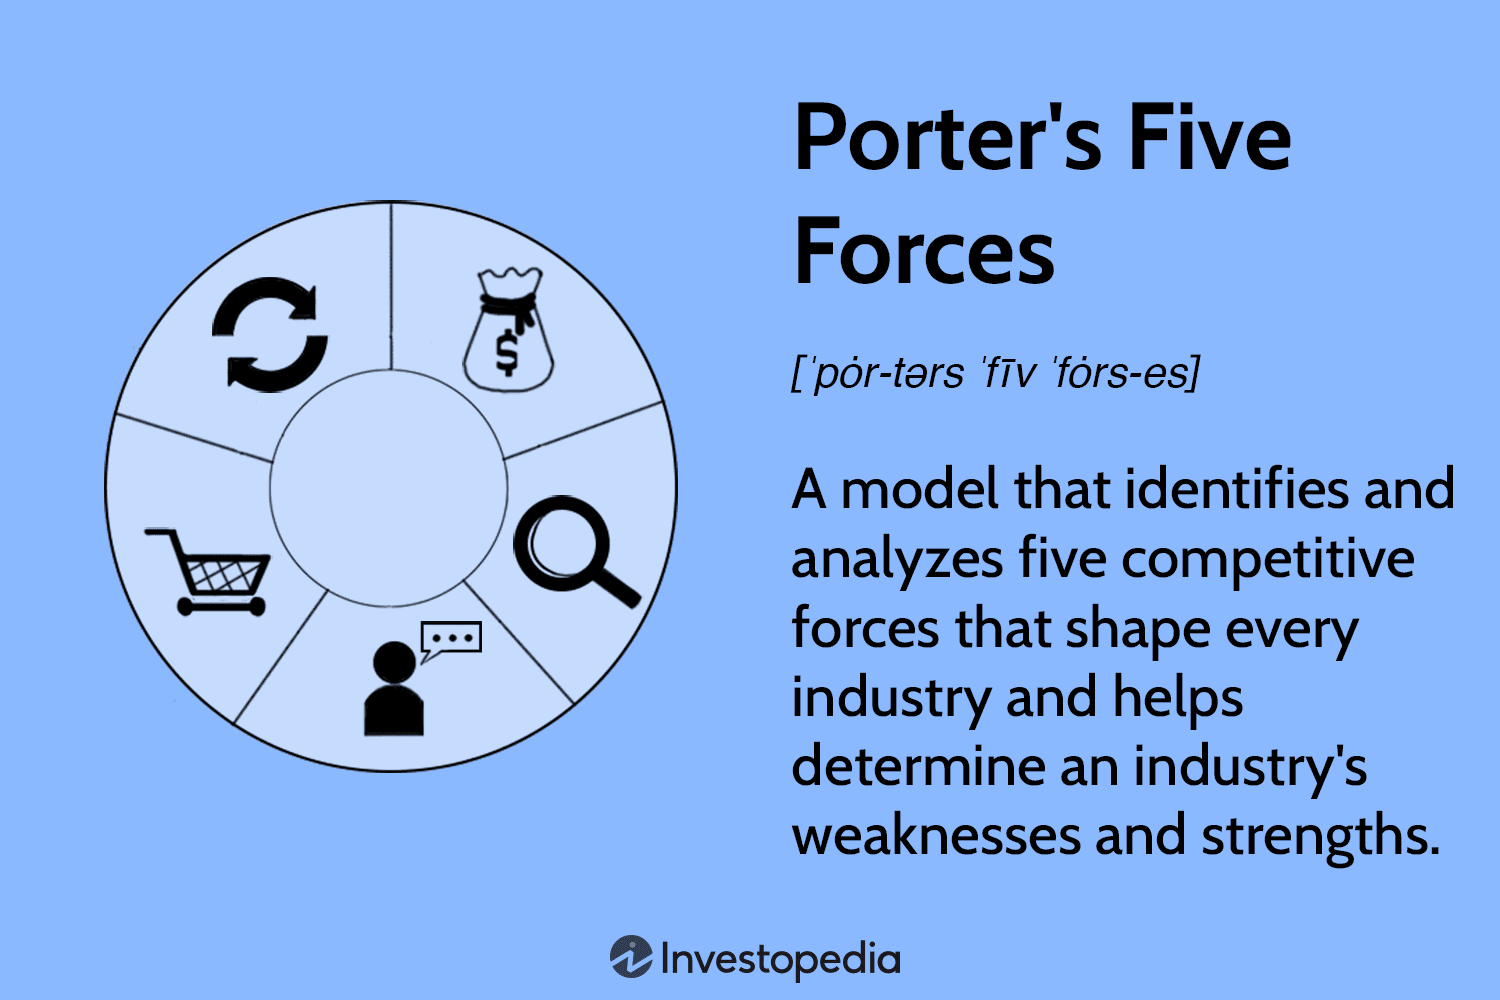 porter's five forces analysis